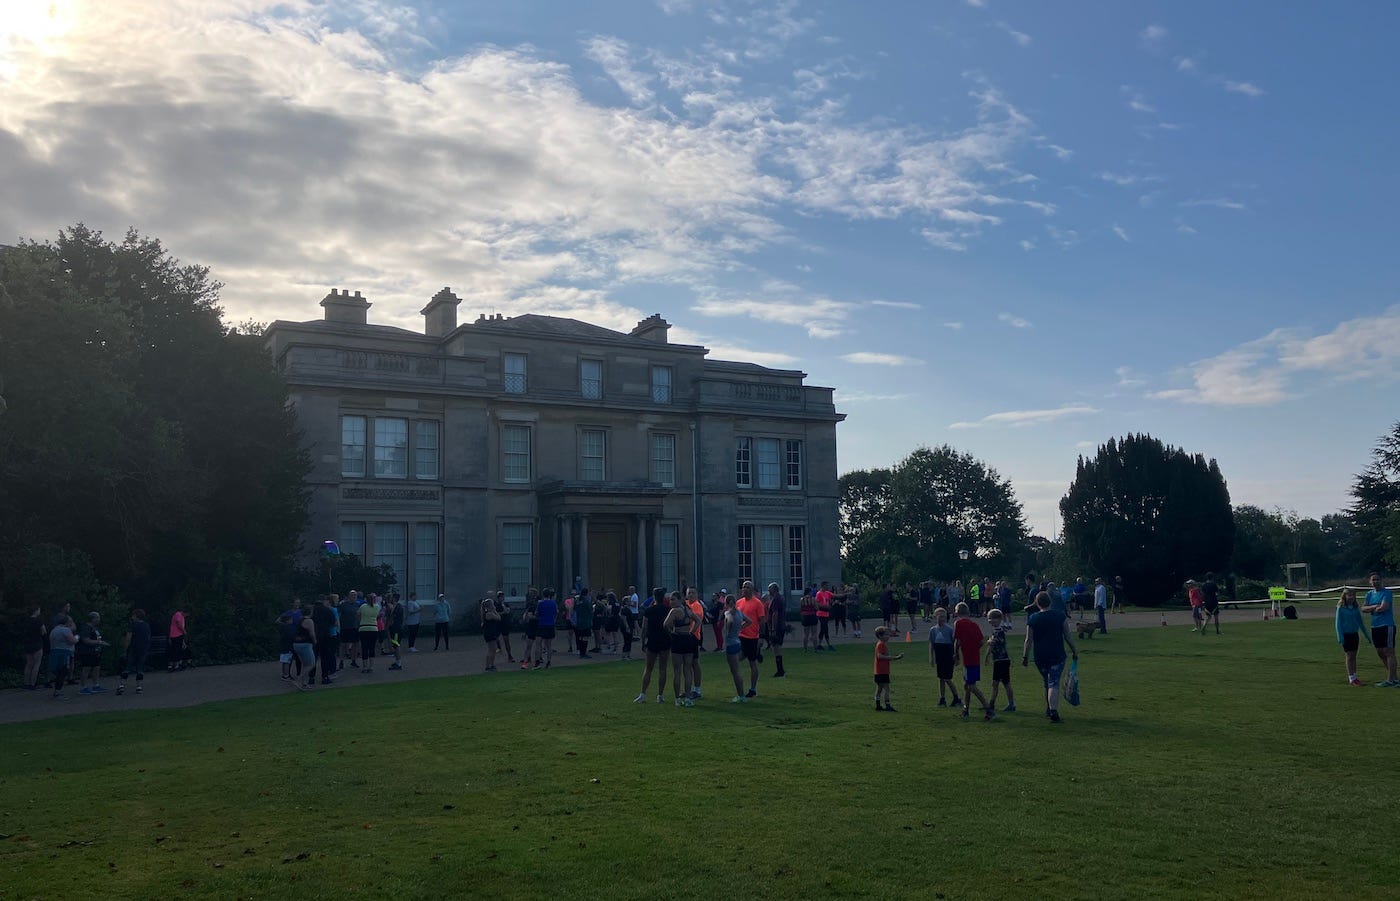 Normanby Hall under cloudy blue sky looking over a large lawn with parkrunners gathering